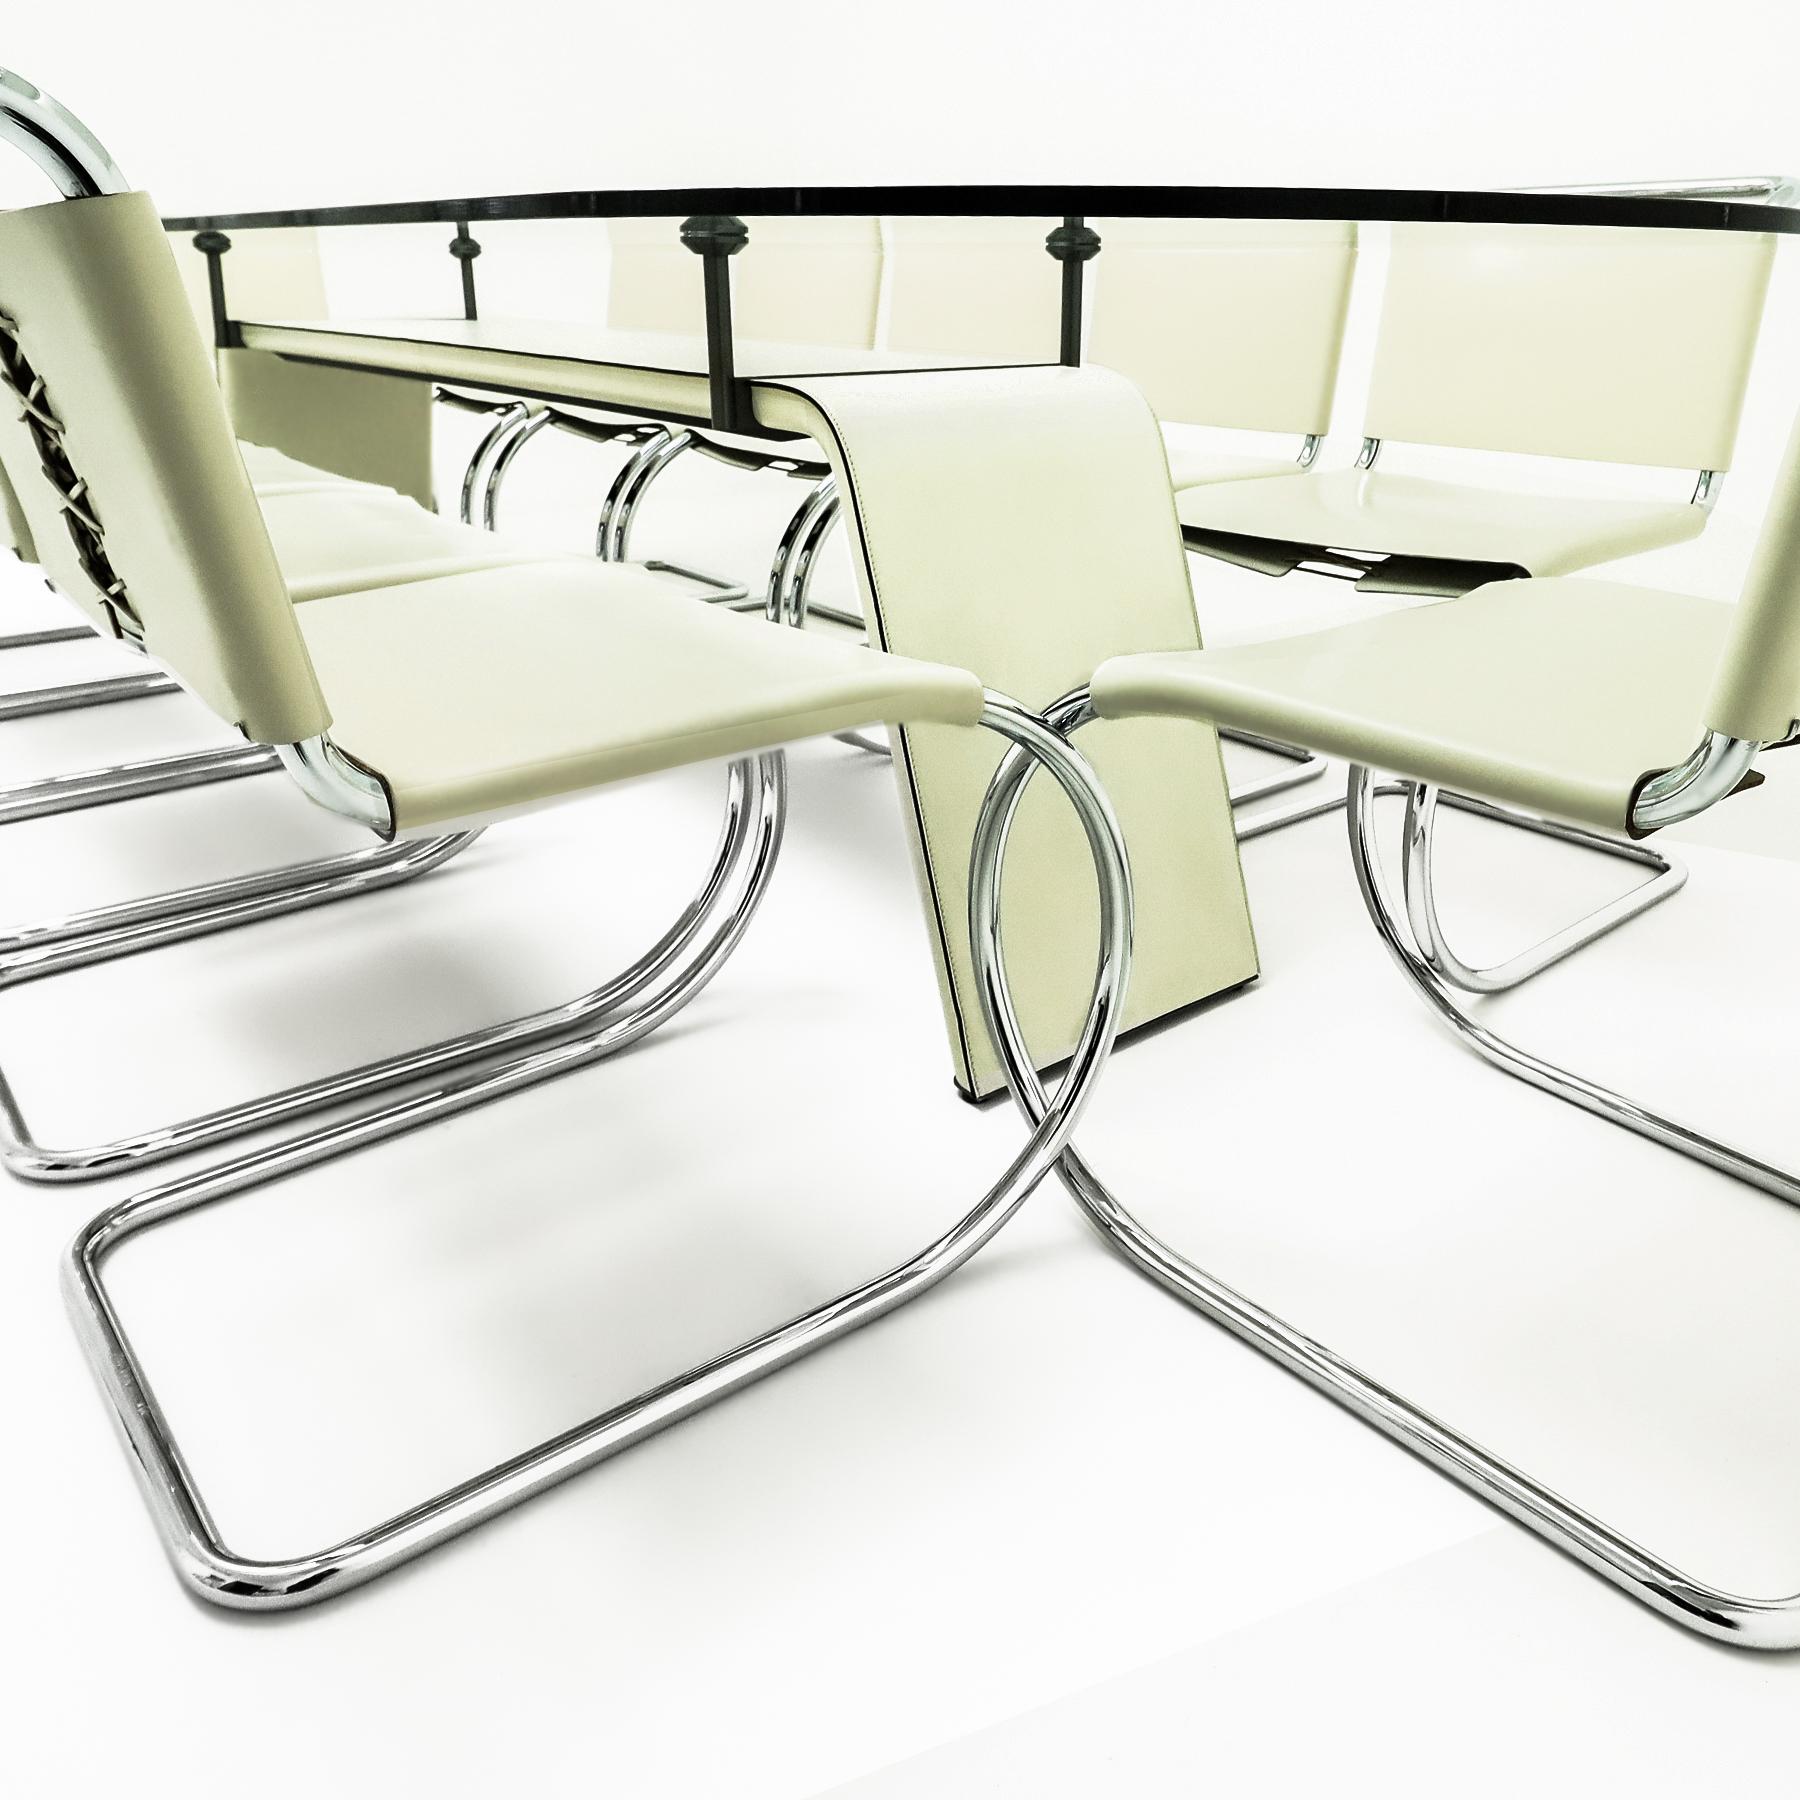 Late 20th Century 12 Knoll, Mies van der Rohe MR10 chairs matched to a Matteo Grassi dining table